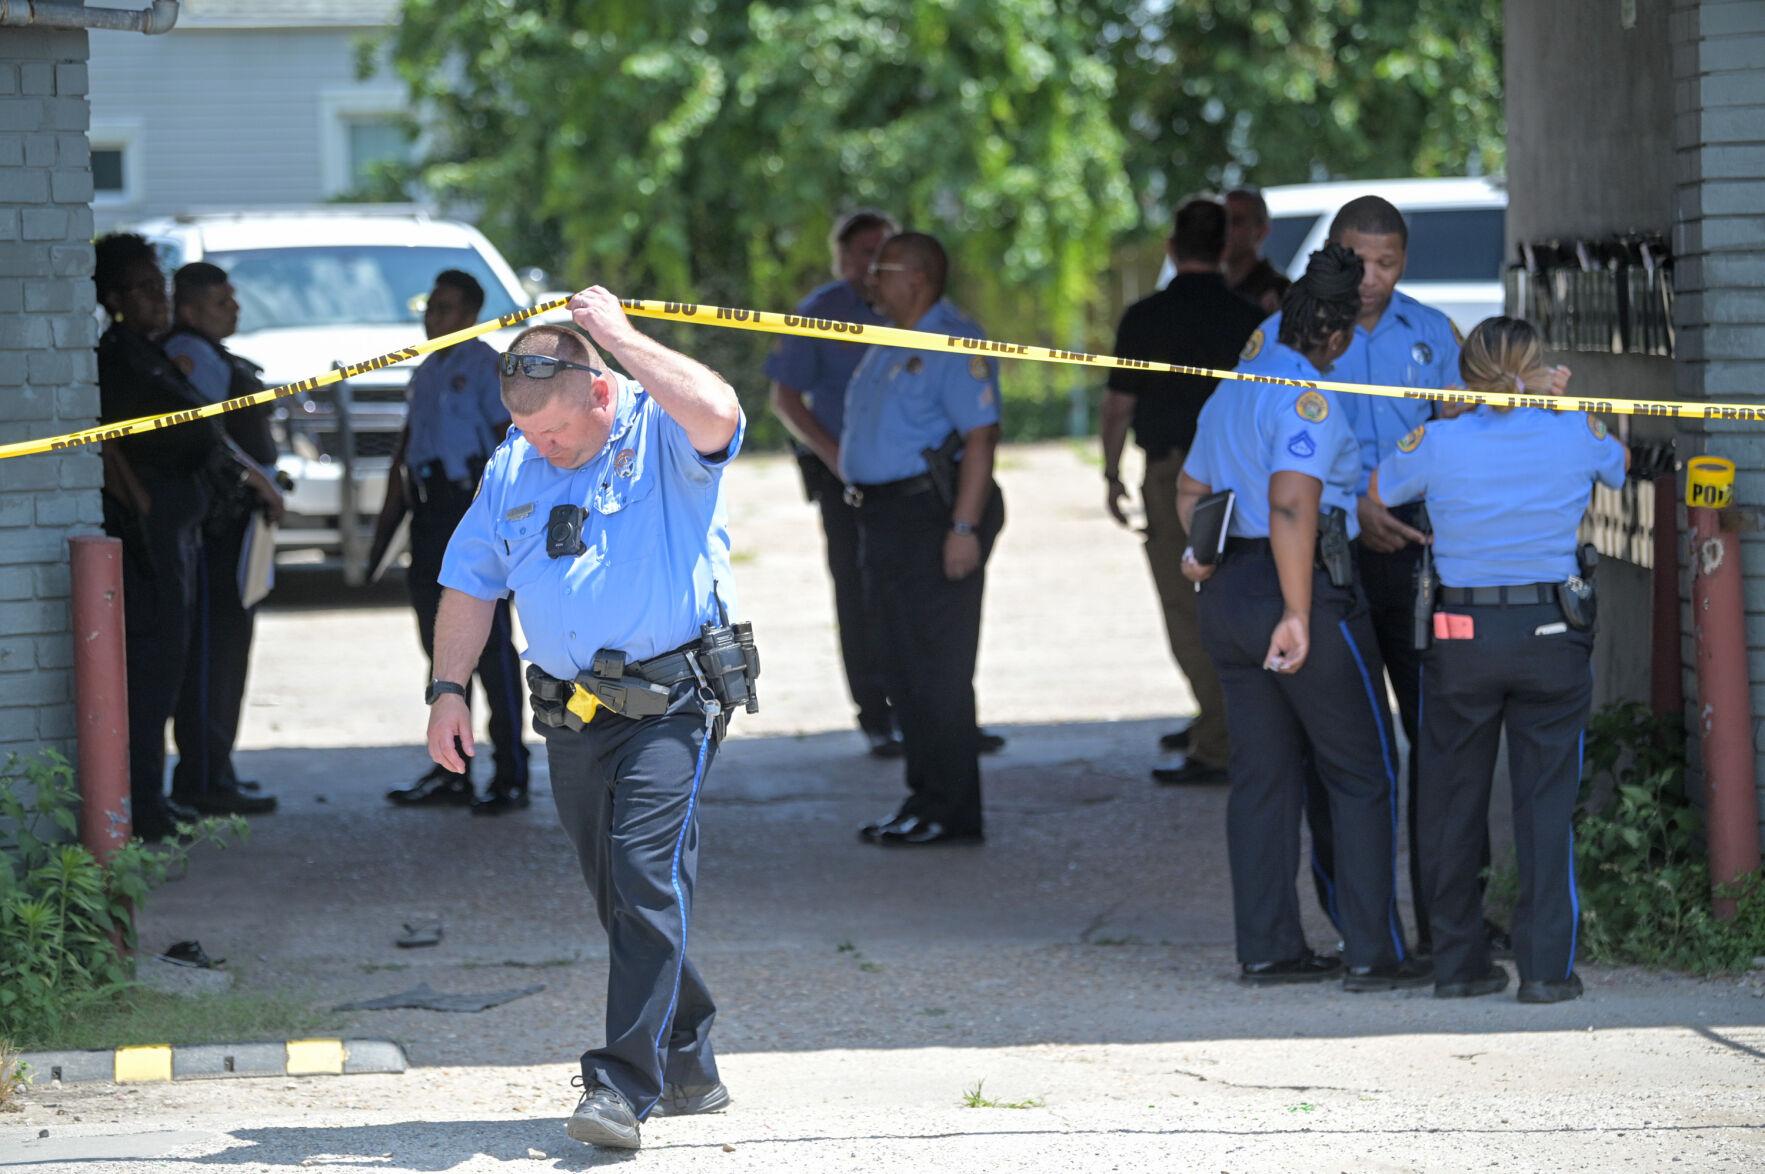 New Orleans leads nation in murders midway through 2022, city analyst